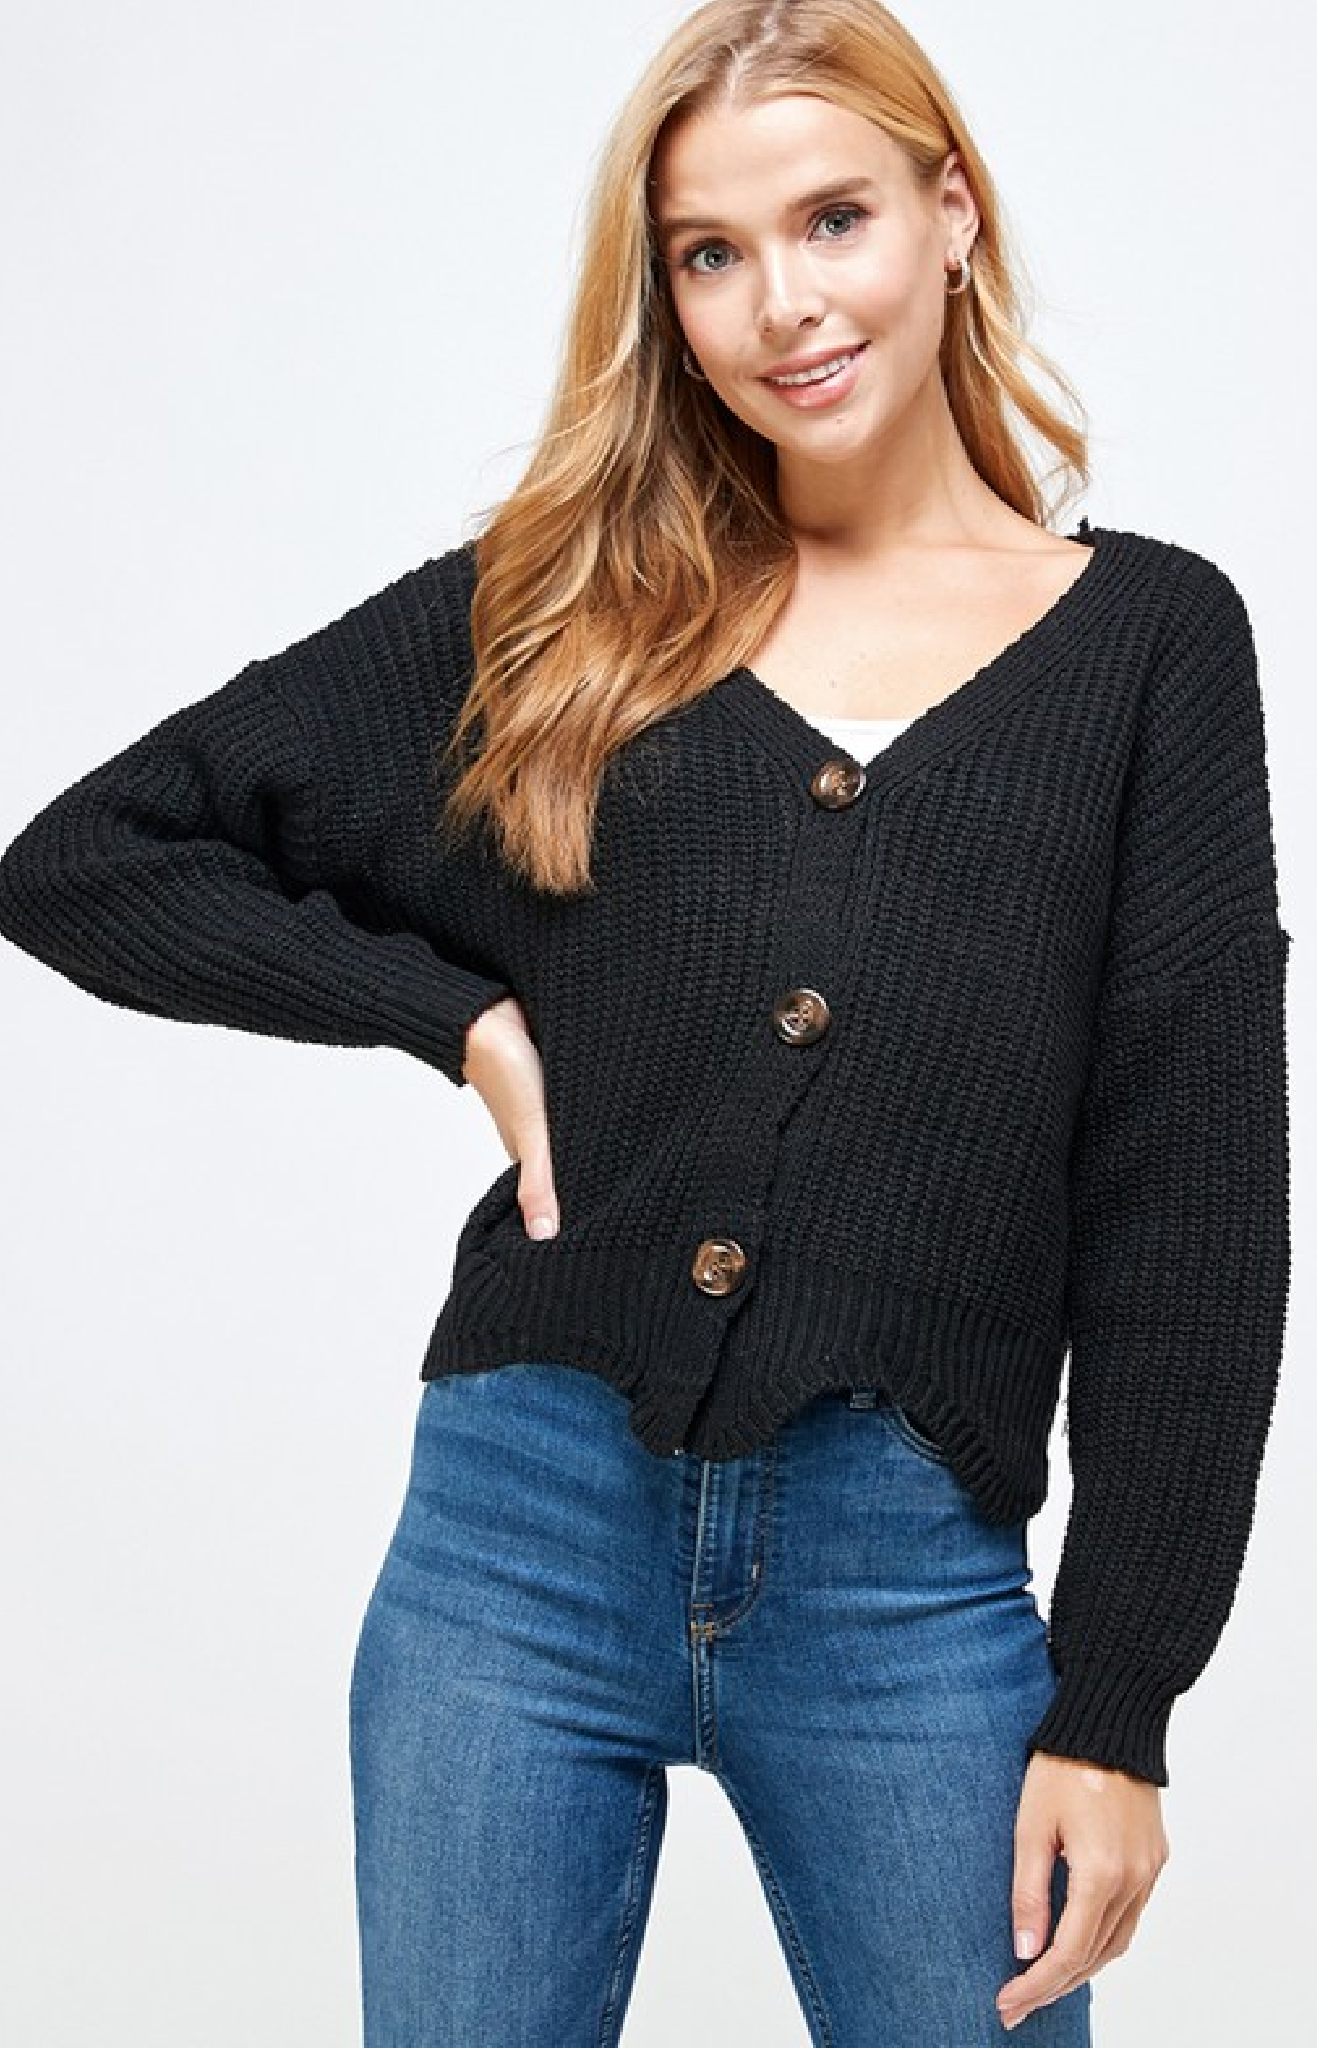 In Your Dreams Sweater - Piper and Hollow Boutique